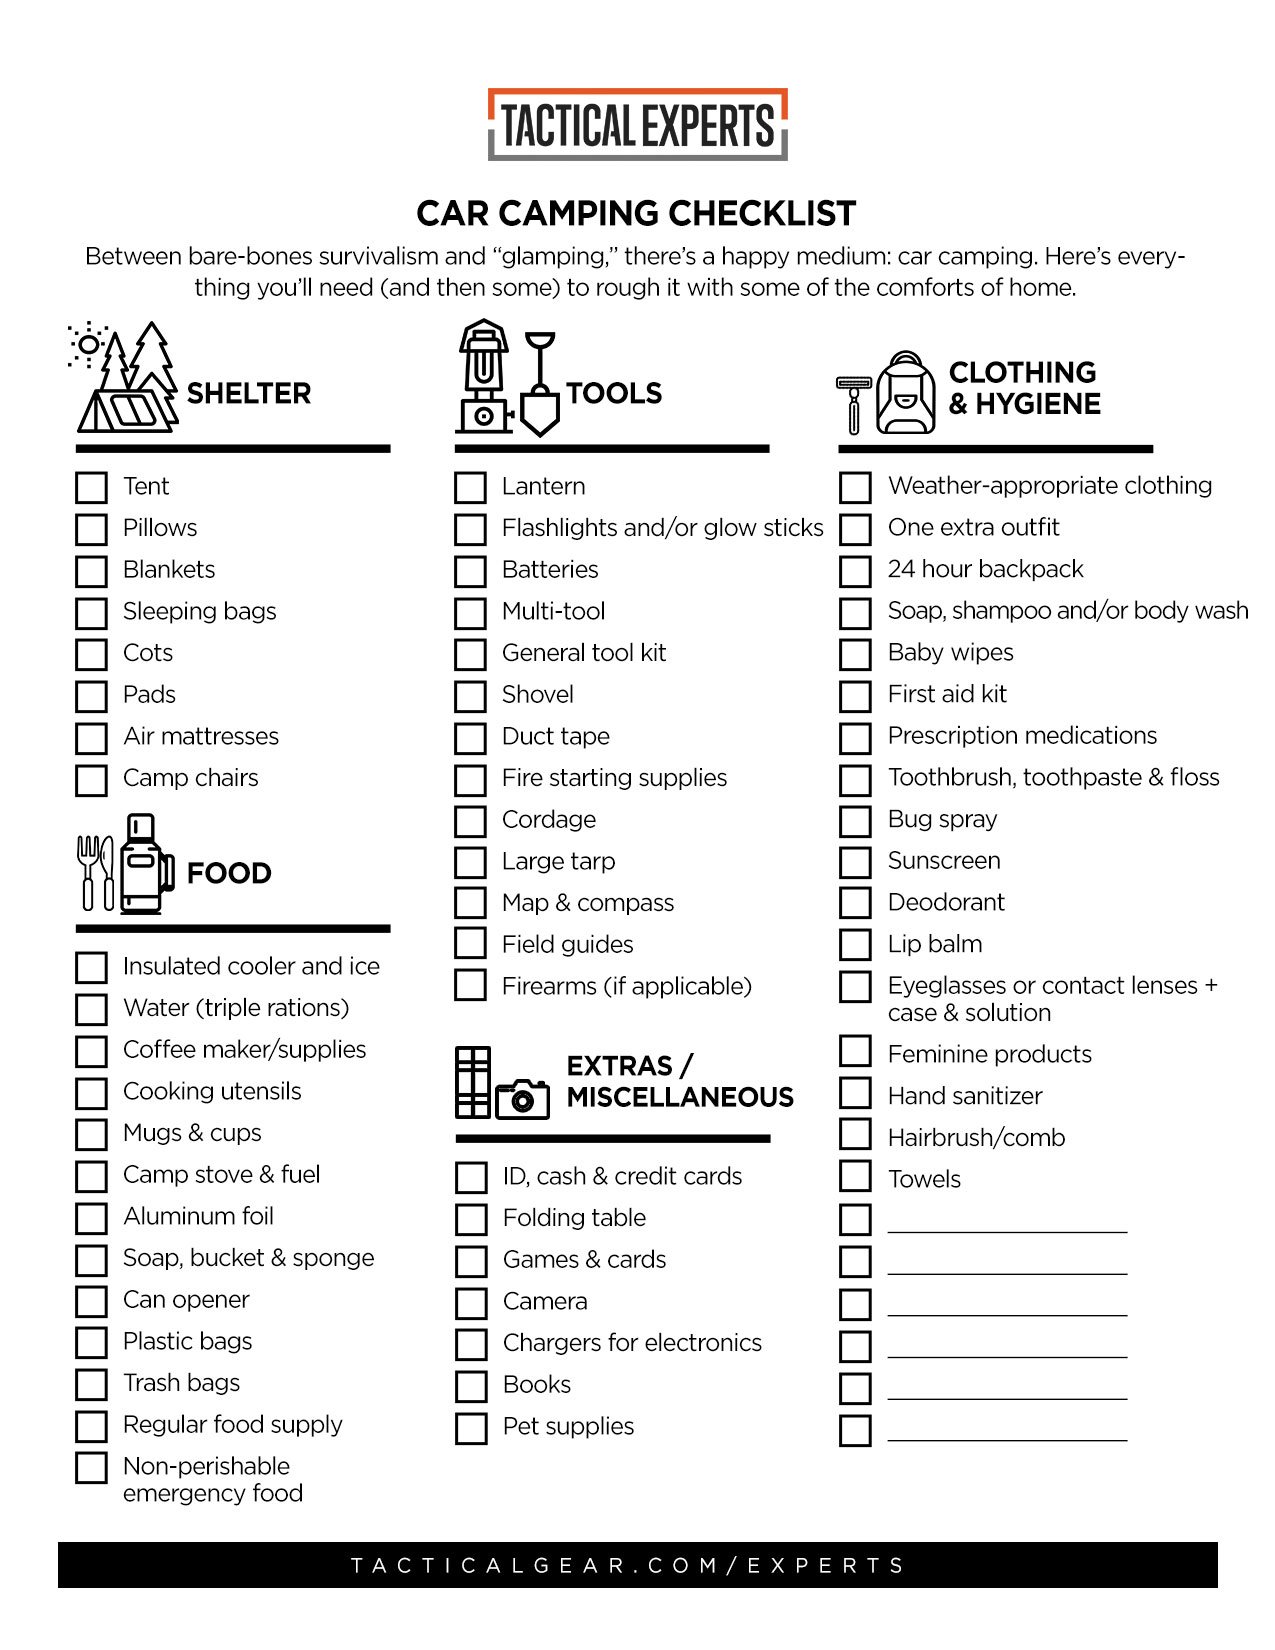 https://assets.cat5.com/images/tactical-experts/car-camping-checklist/car-camping-checklist-infographic-full.jpg